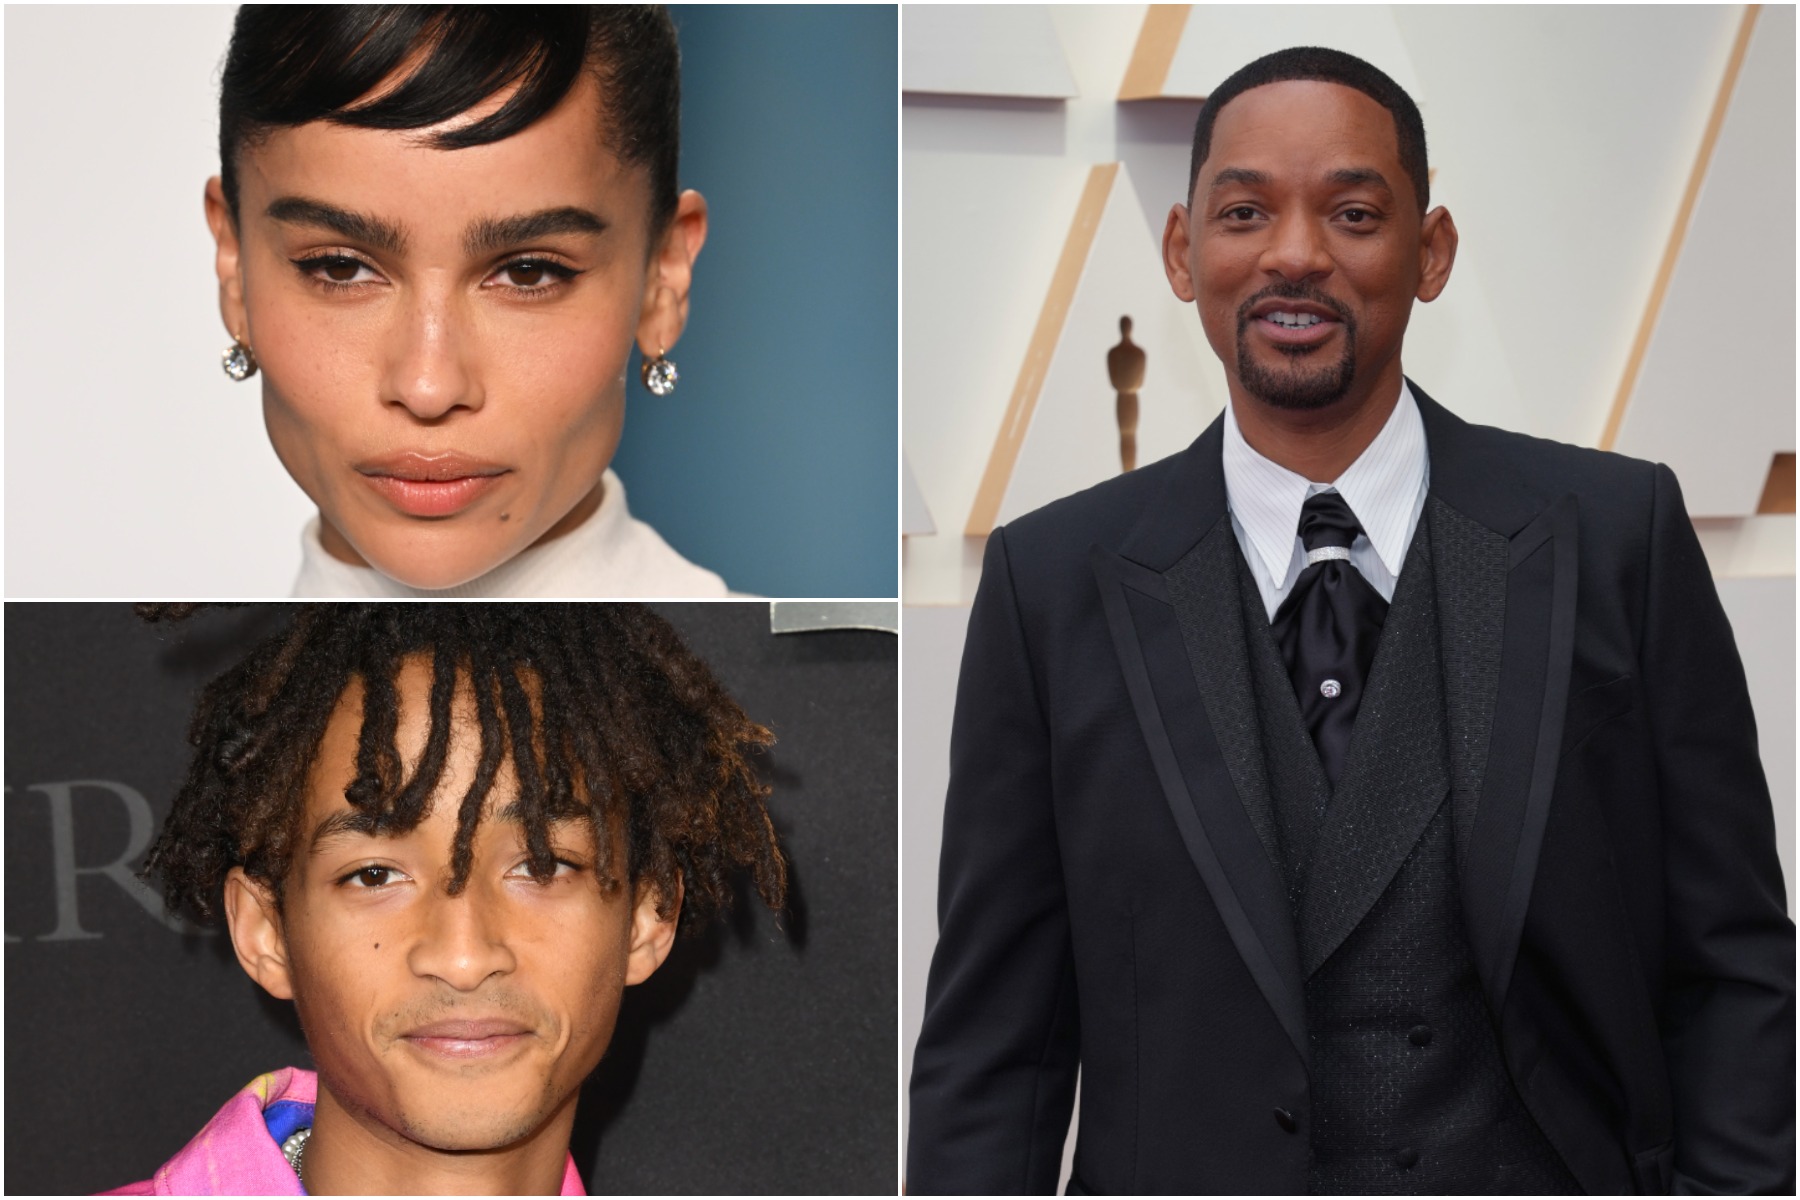 Zoe Kravitz Faces Instant Online Backlash Over Will Smith Remarks